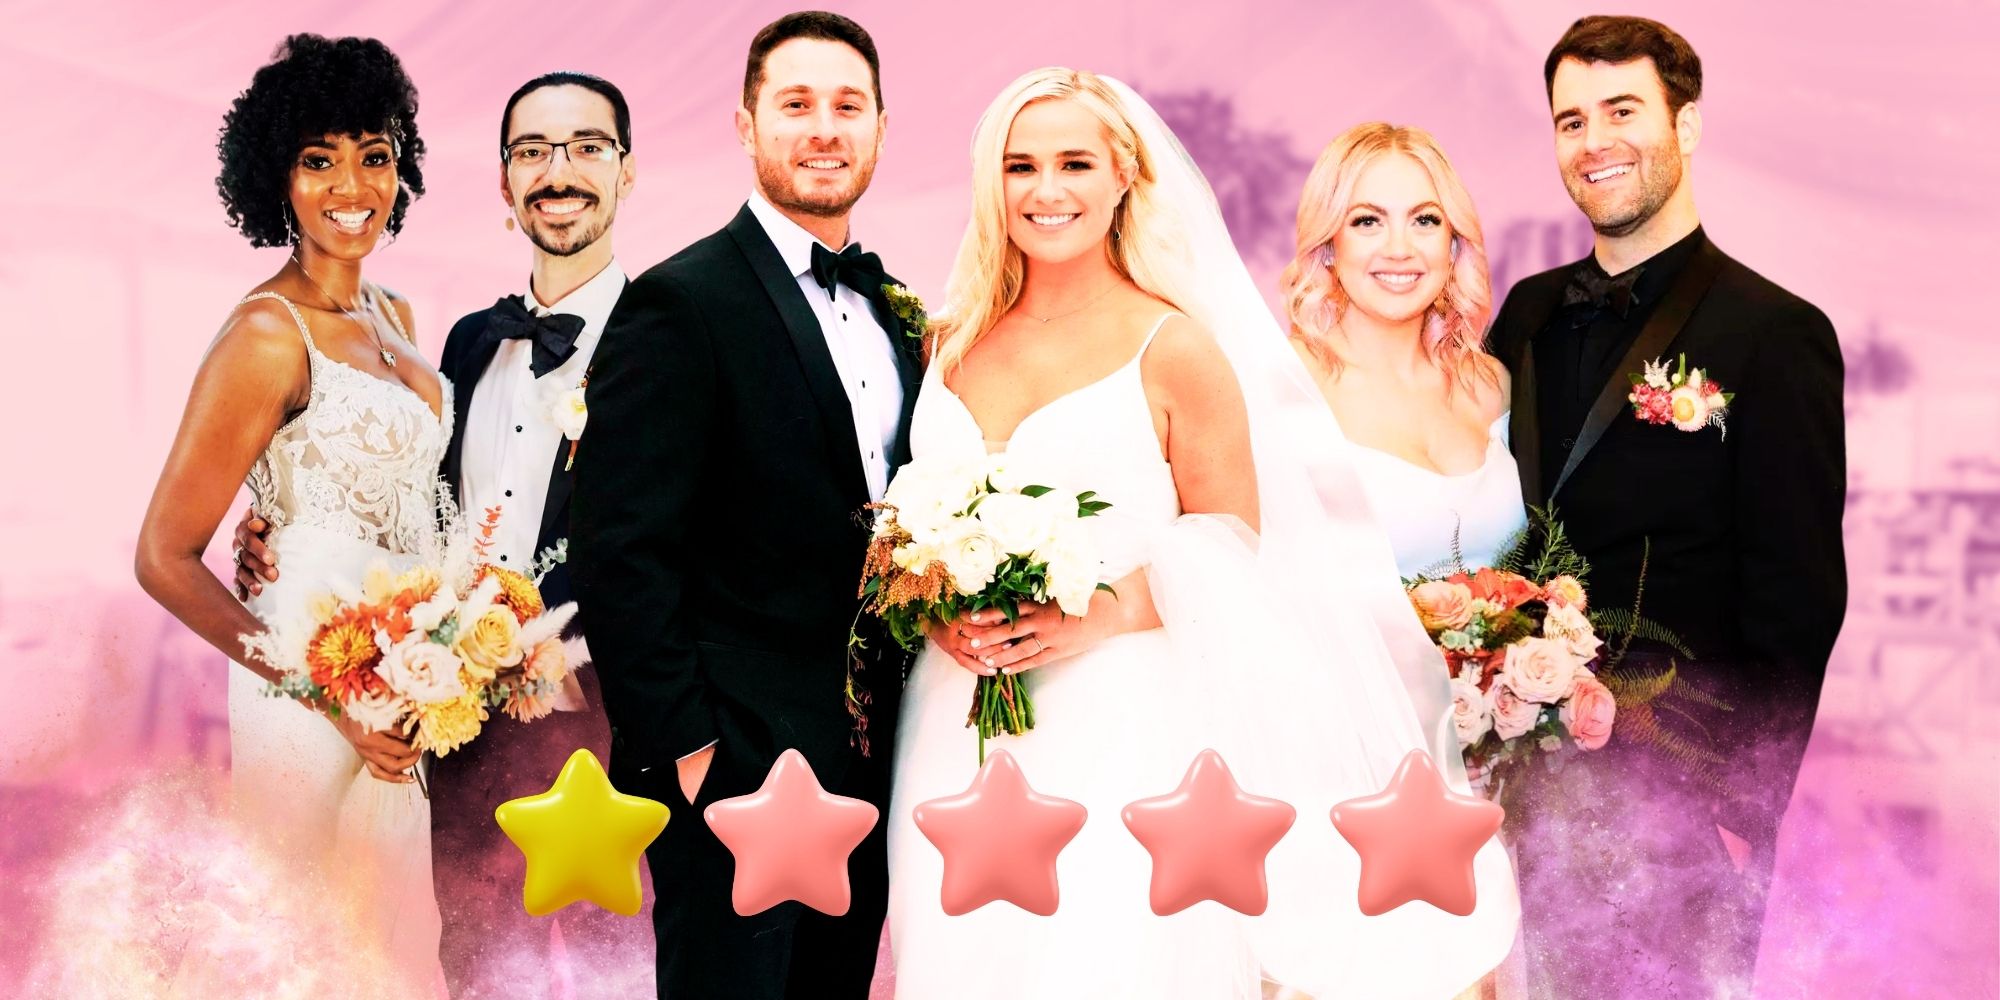 Married at First Sight season 17 cast montage in wedding outfits with pink background